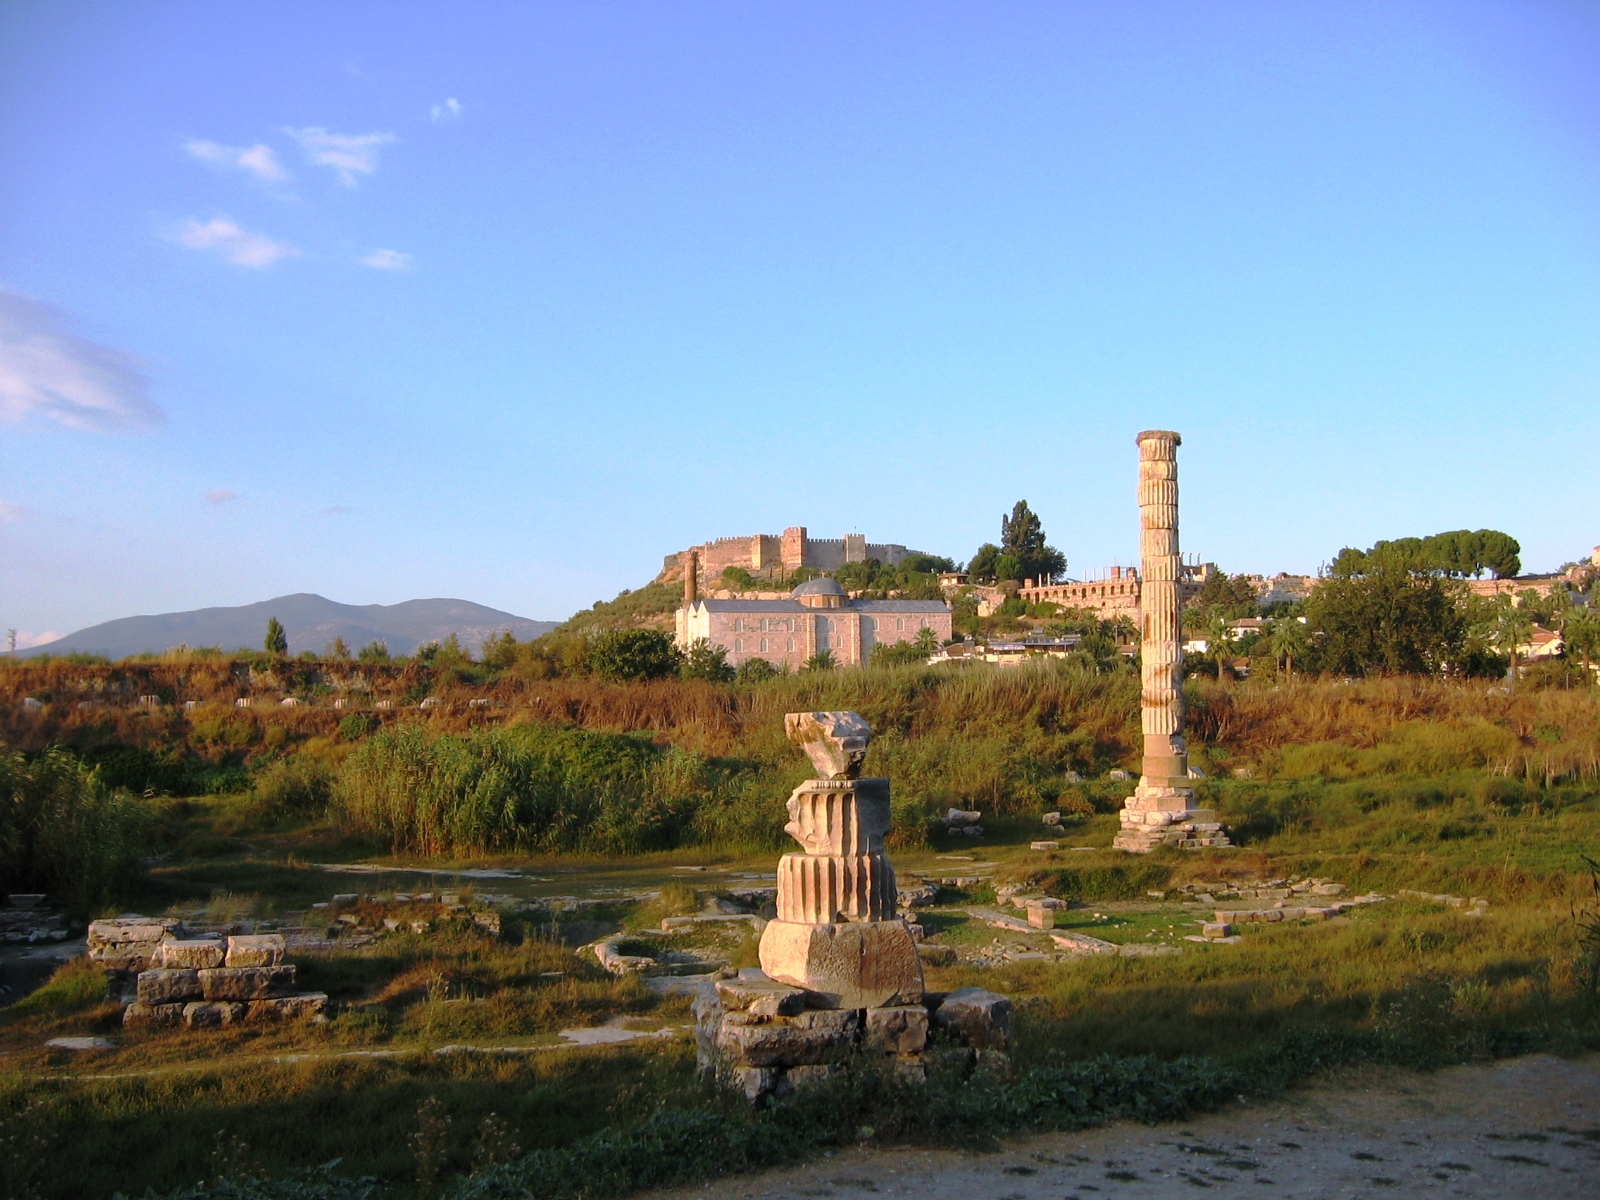 High Resolution Wallpaper | Temple Of Artemis 1600x1200 px